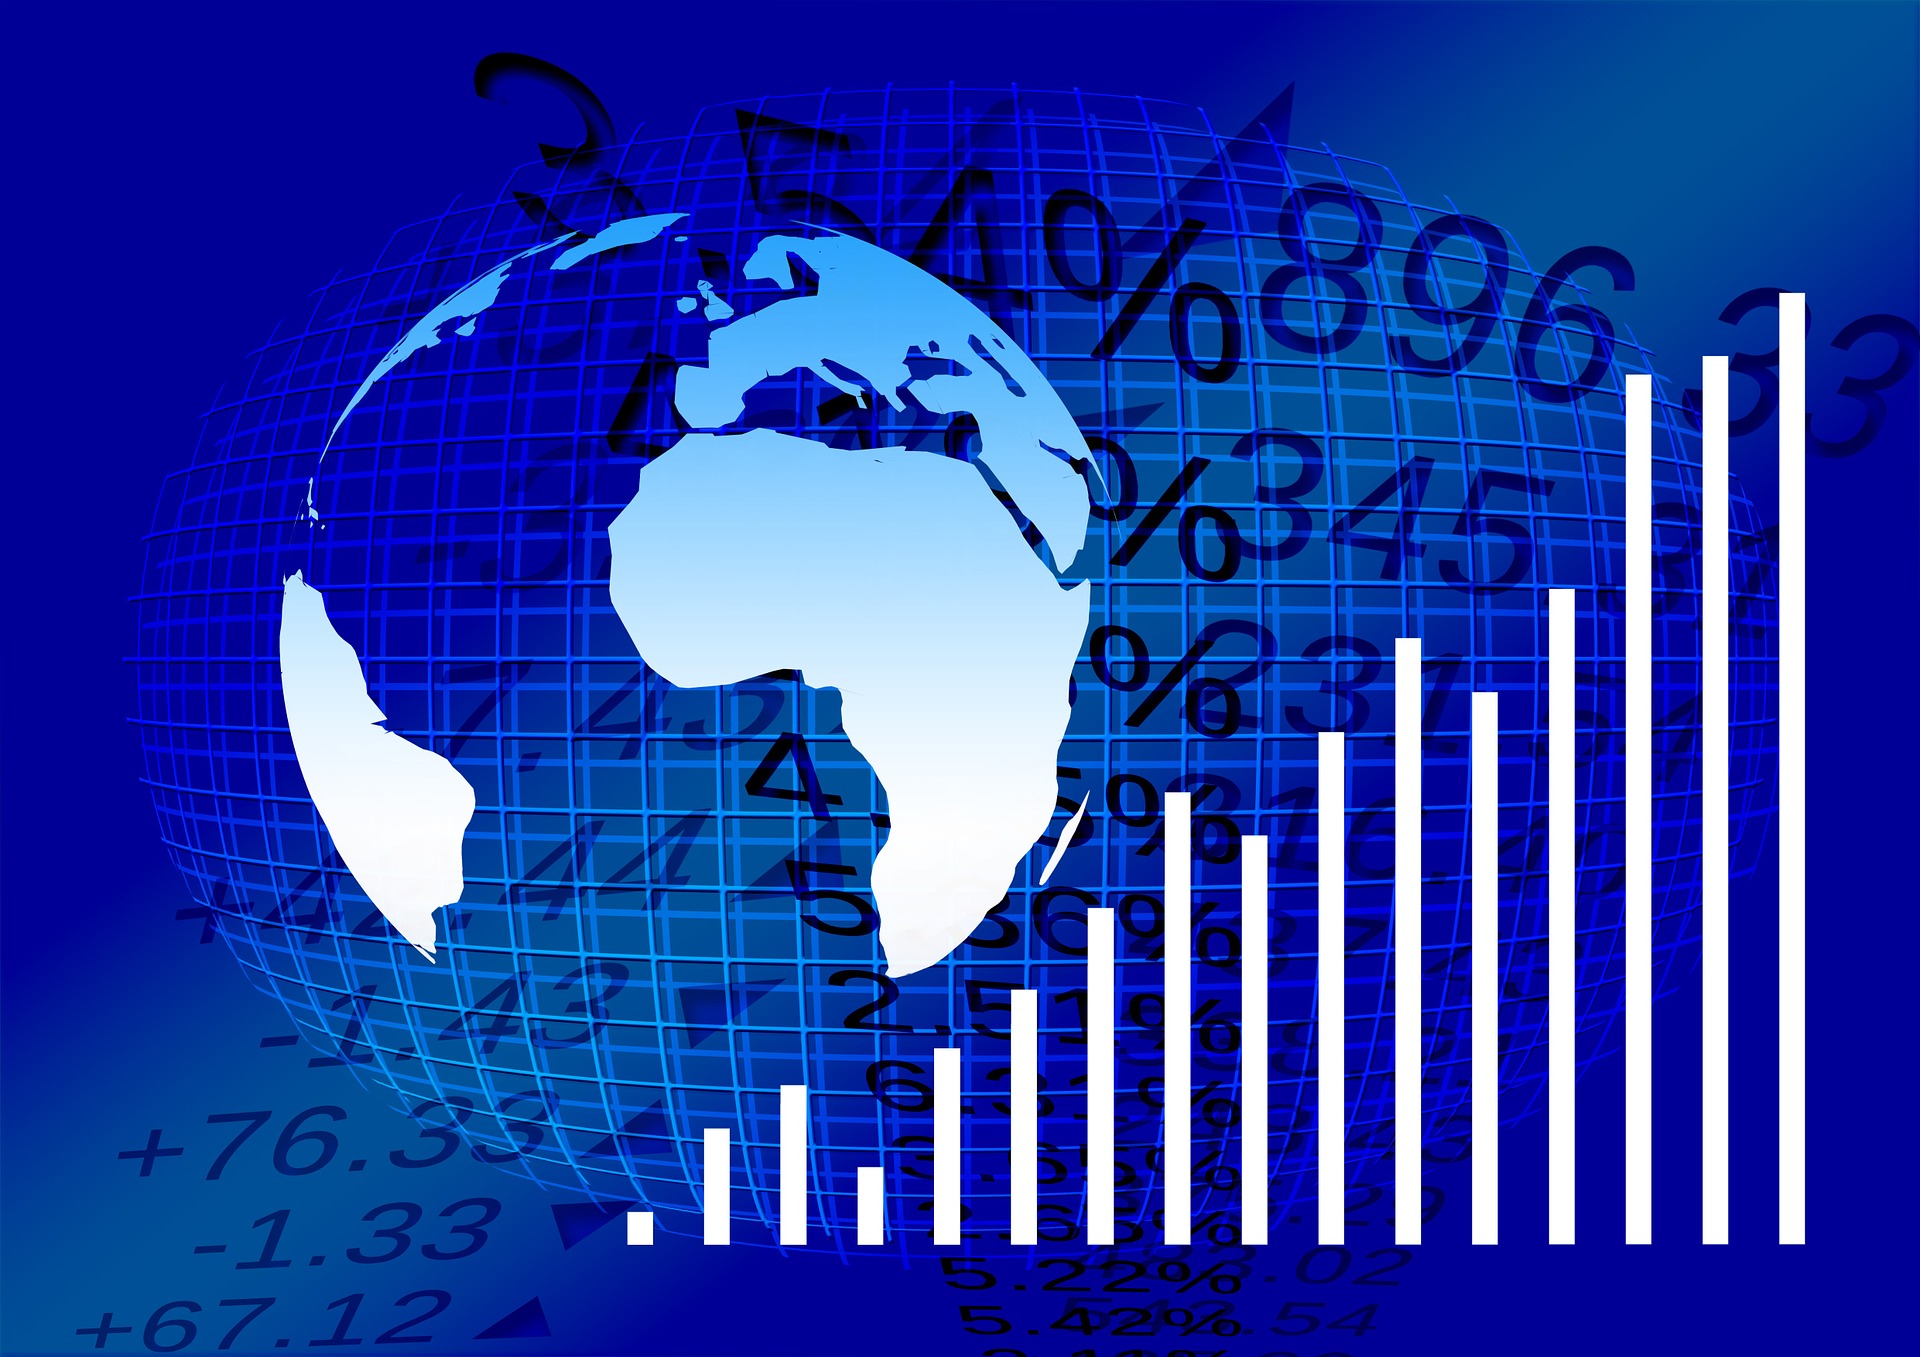 Stock photo of the globe and lines representing the stock market prices